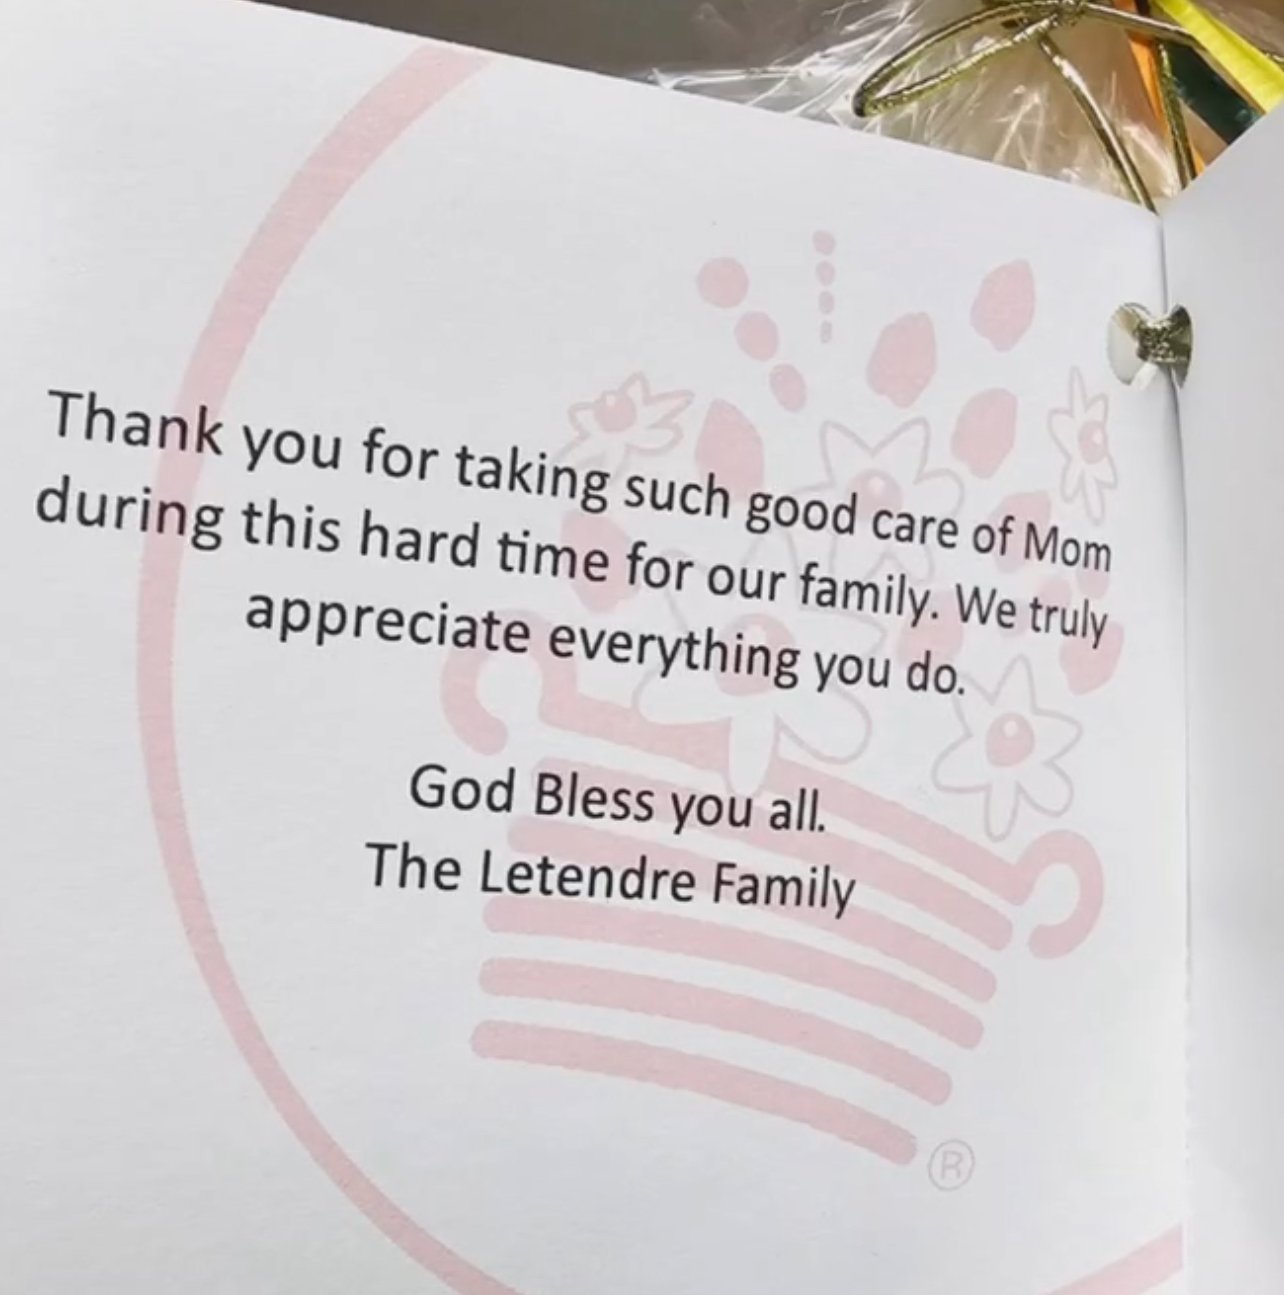 Gratitude speaks volumes. 💛 It's moments like these that remind us why we do what we do. Thank you for trusting us with your loved ones during their journey. Your kind words mean the world to us. 🌟 

#HospiceCare #FamilyFirst #GratefulHeart #amarih